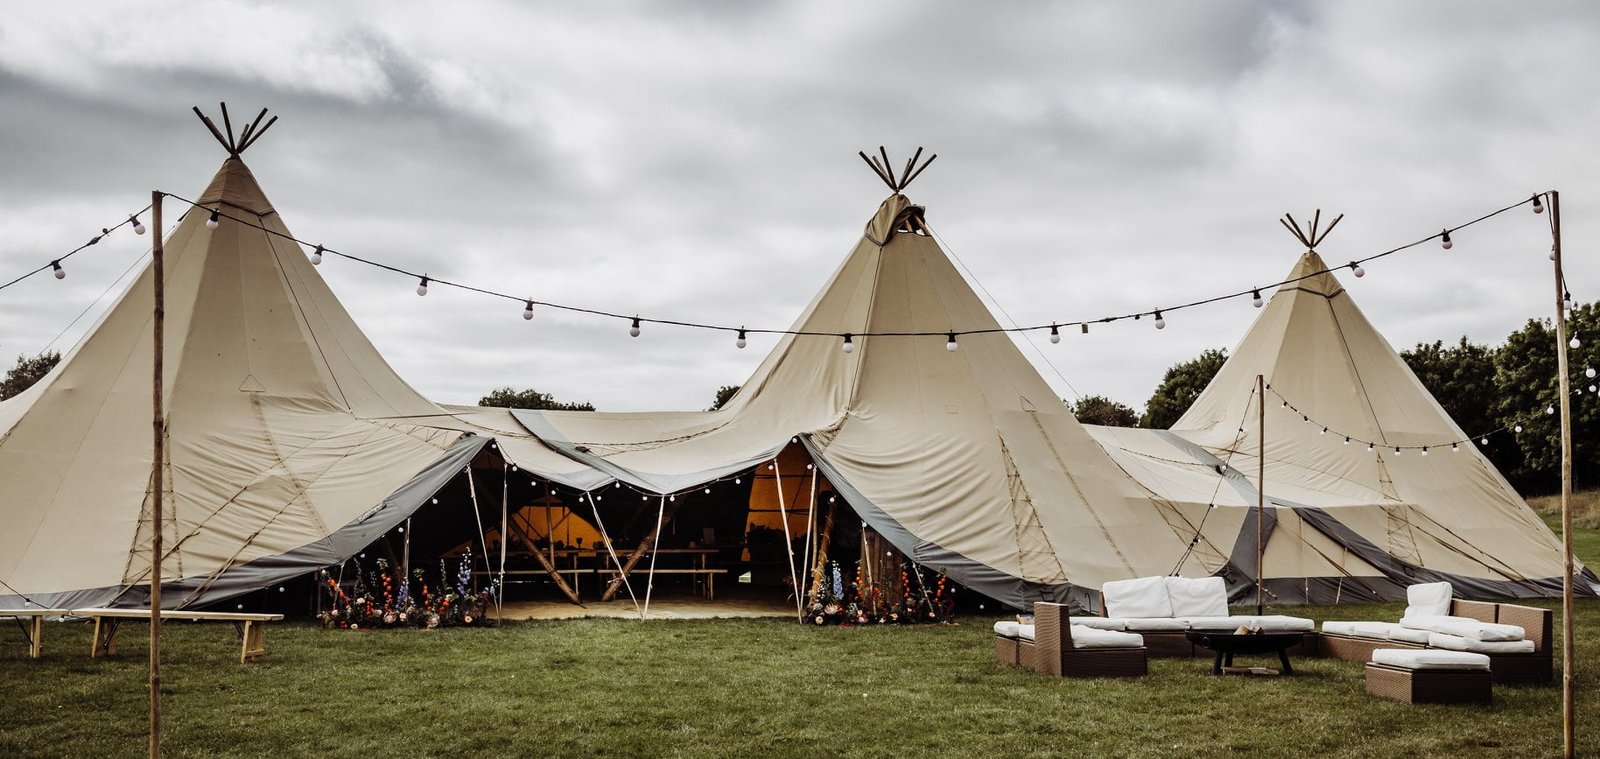 3 Giant Hat Tipis set up in a line with outdoor seating, fire pit and festoon lights on wooden poles